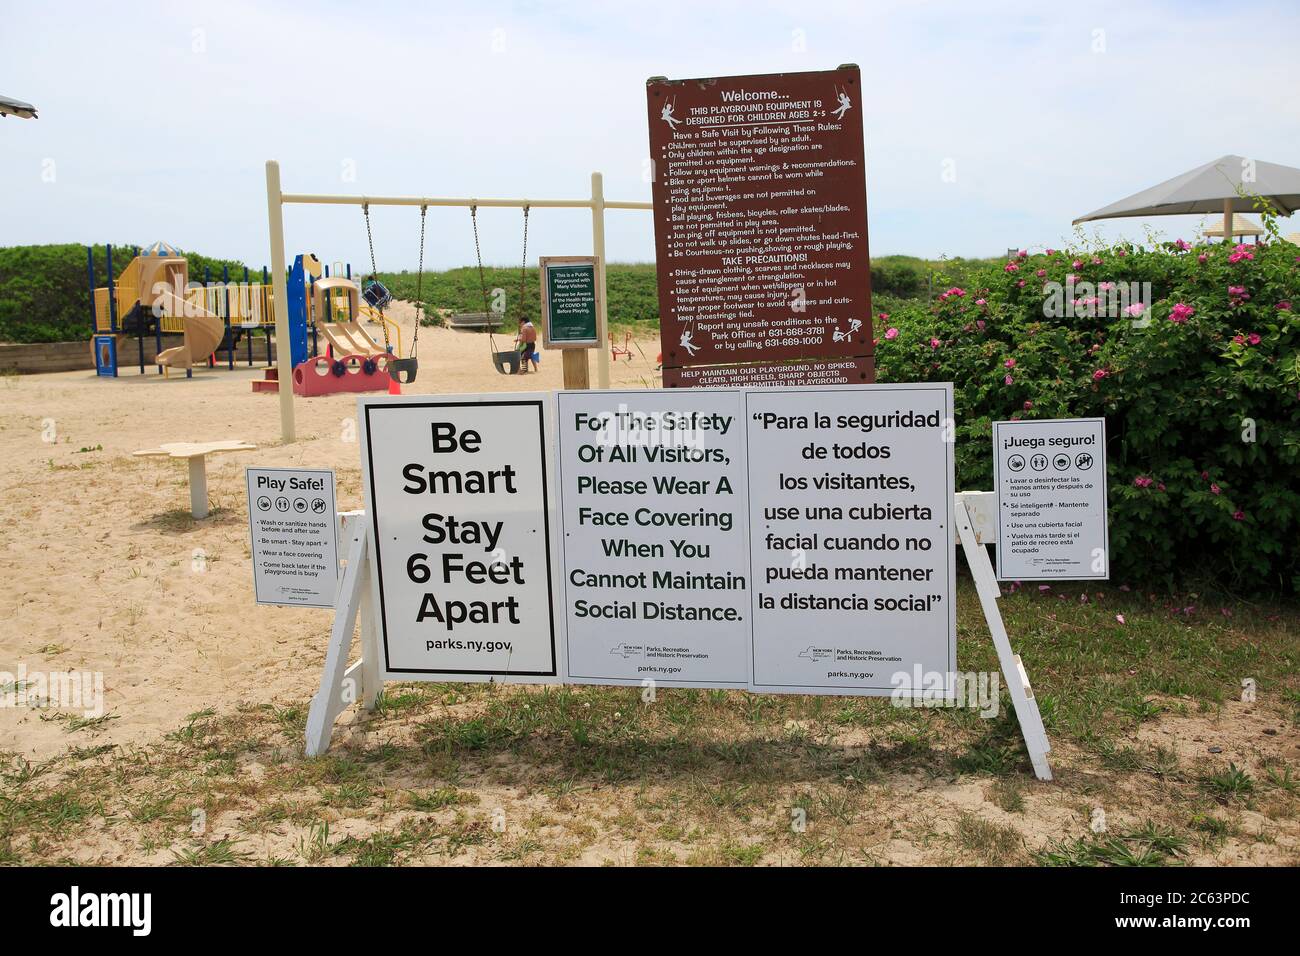 Hither Hills State Park, Beach, sign on playground warning people to keep six feet apart, waer maskm practice social distancing to prevent the spread of coronavirus COVID-19, Hither Hills, Montauk, Long Island, New York, USA Stock Photo